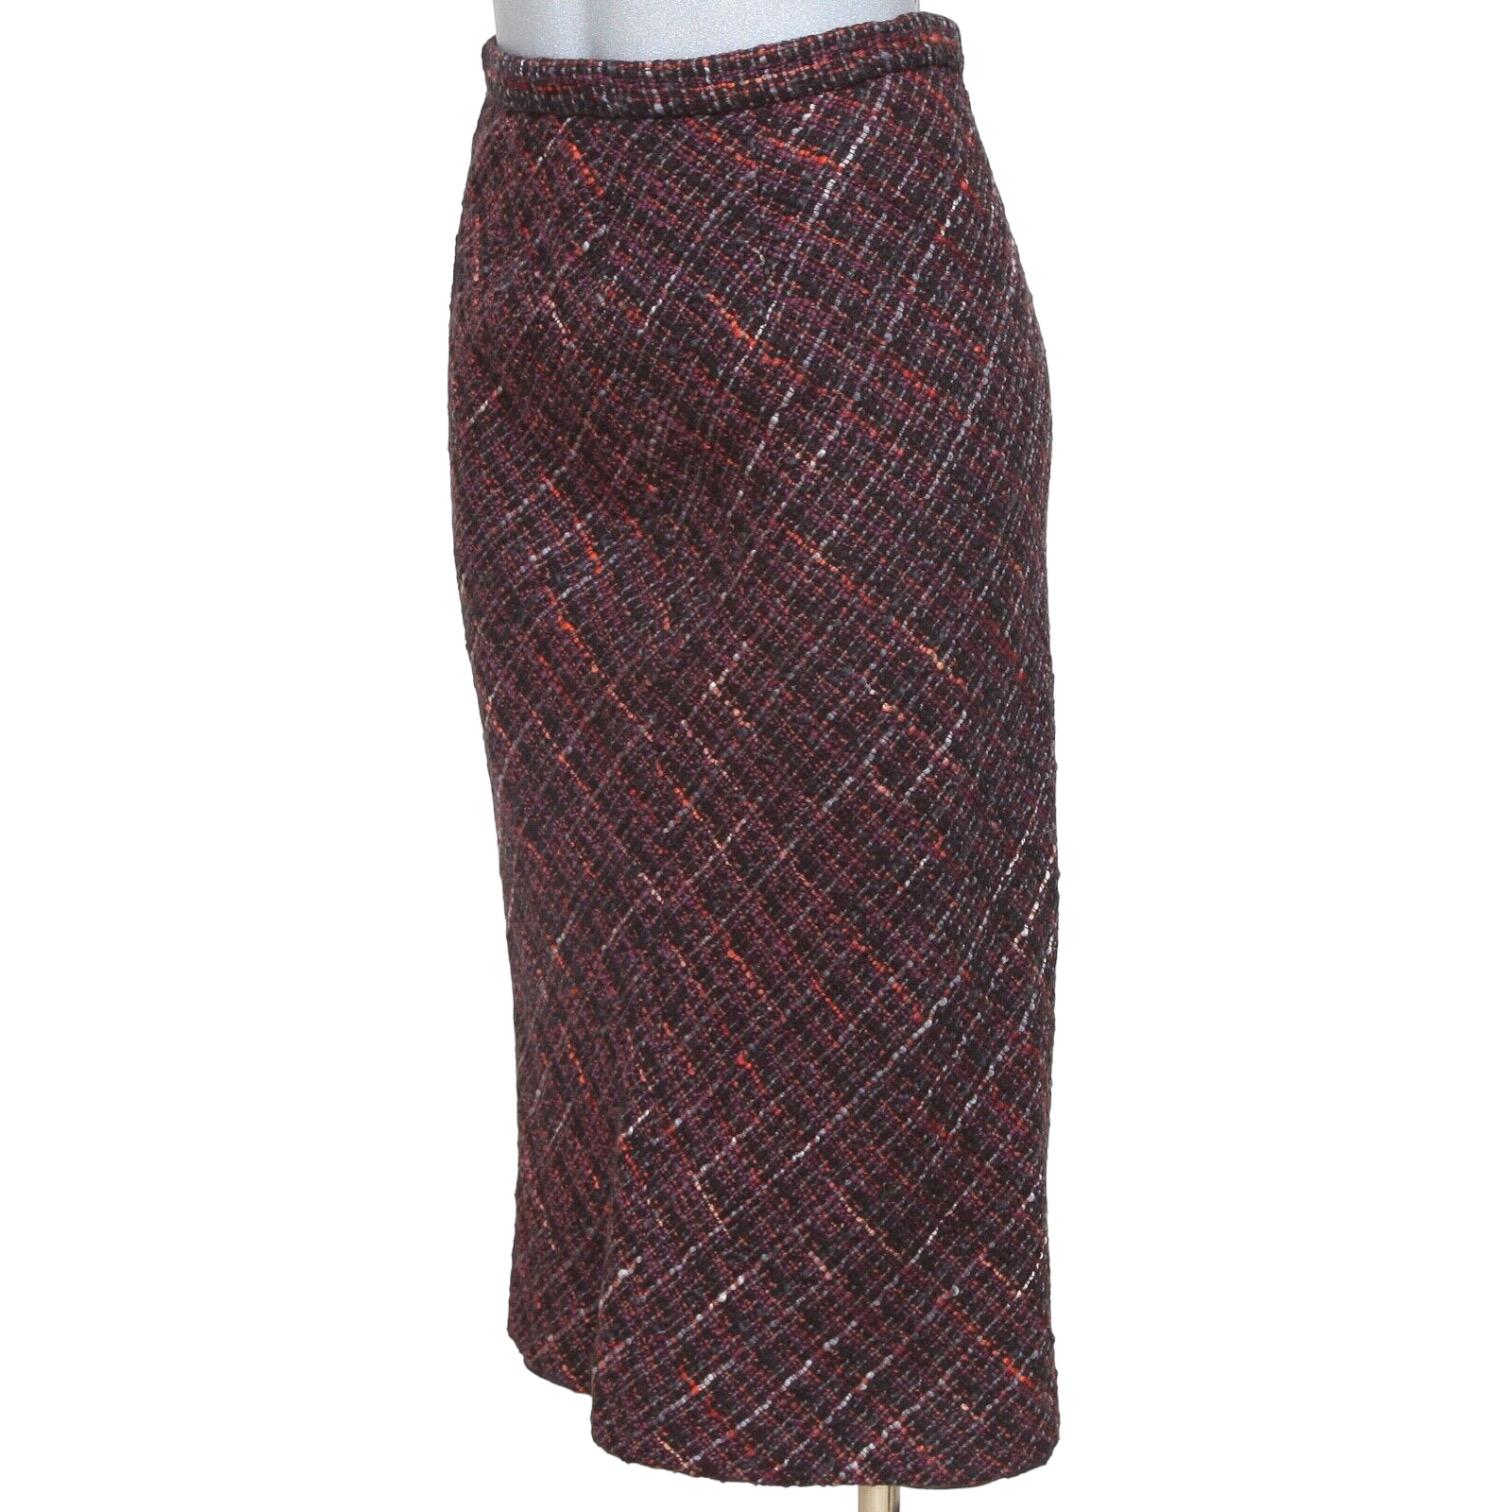 DOLCE & GABBANA Skirt Tweed Knee Length Multicolor Leopard Print Sz 42 In Good Condition For Sale In Hollywood, FL